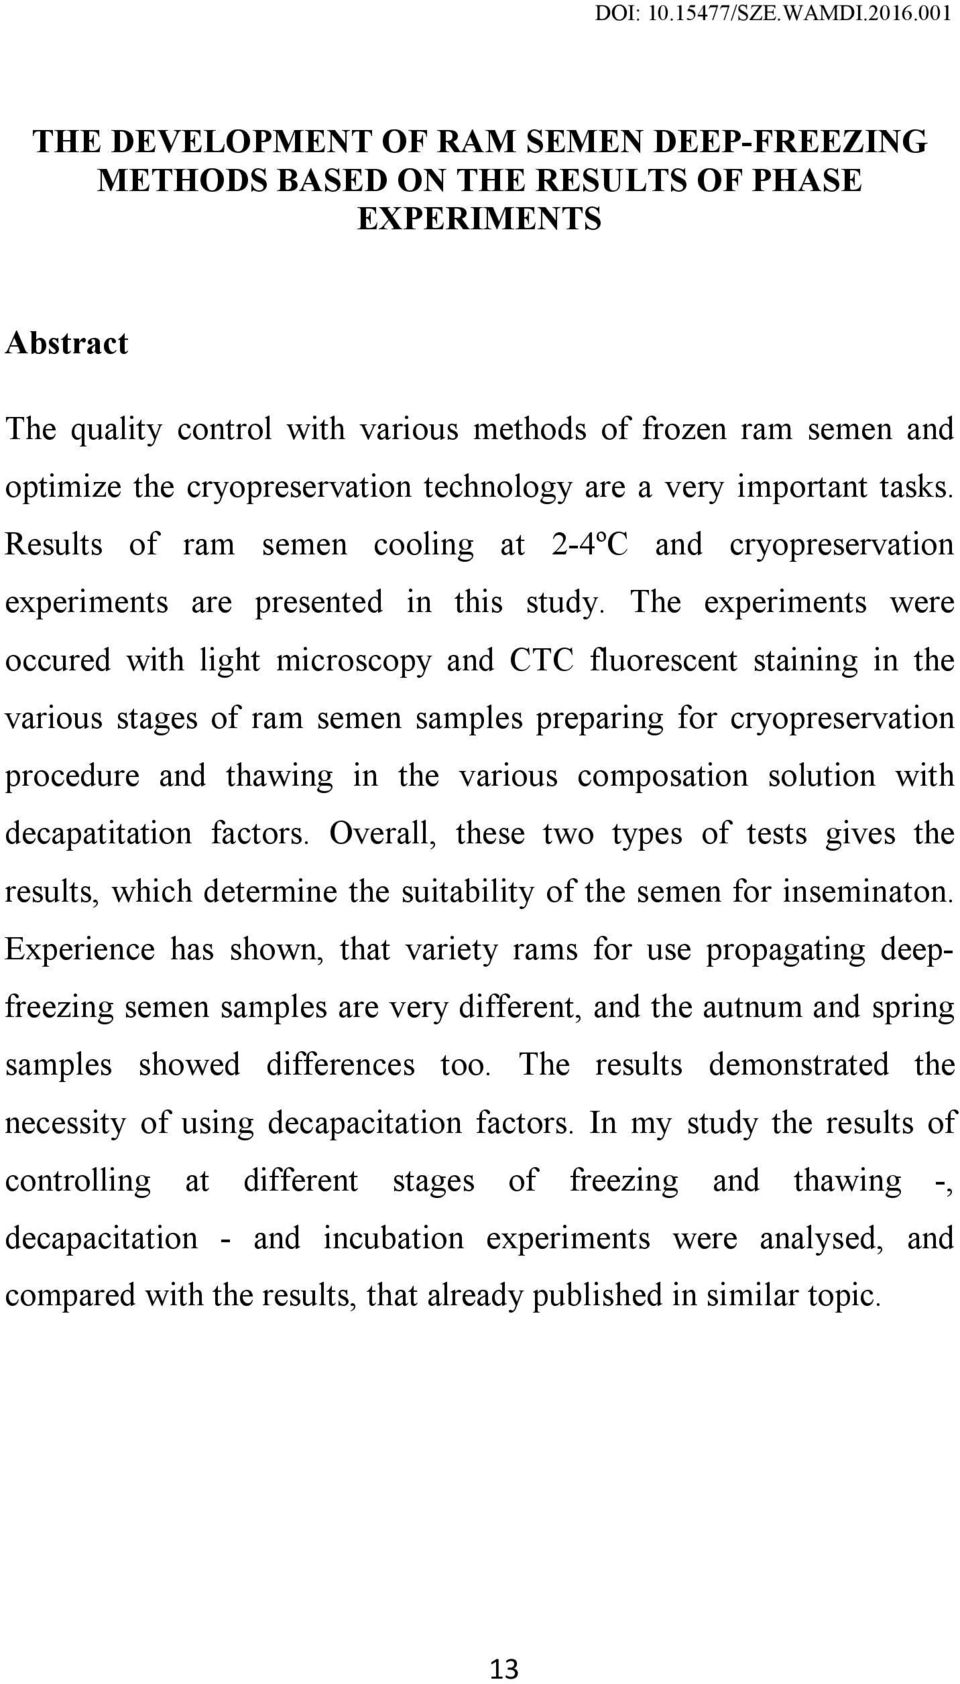 The experiments were occured with light microscopy and CTC fluorescent staining in the various stages of ram semen samples preparing for cryopreservation procedure and thawing in the various